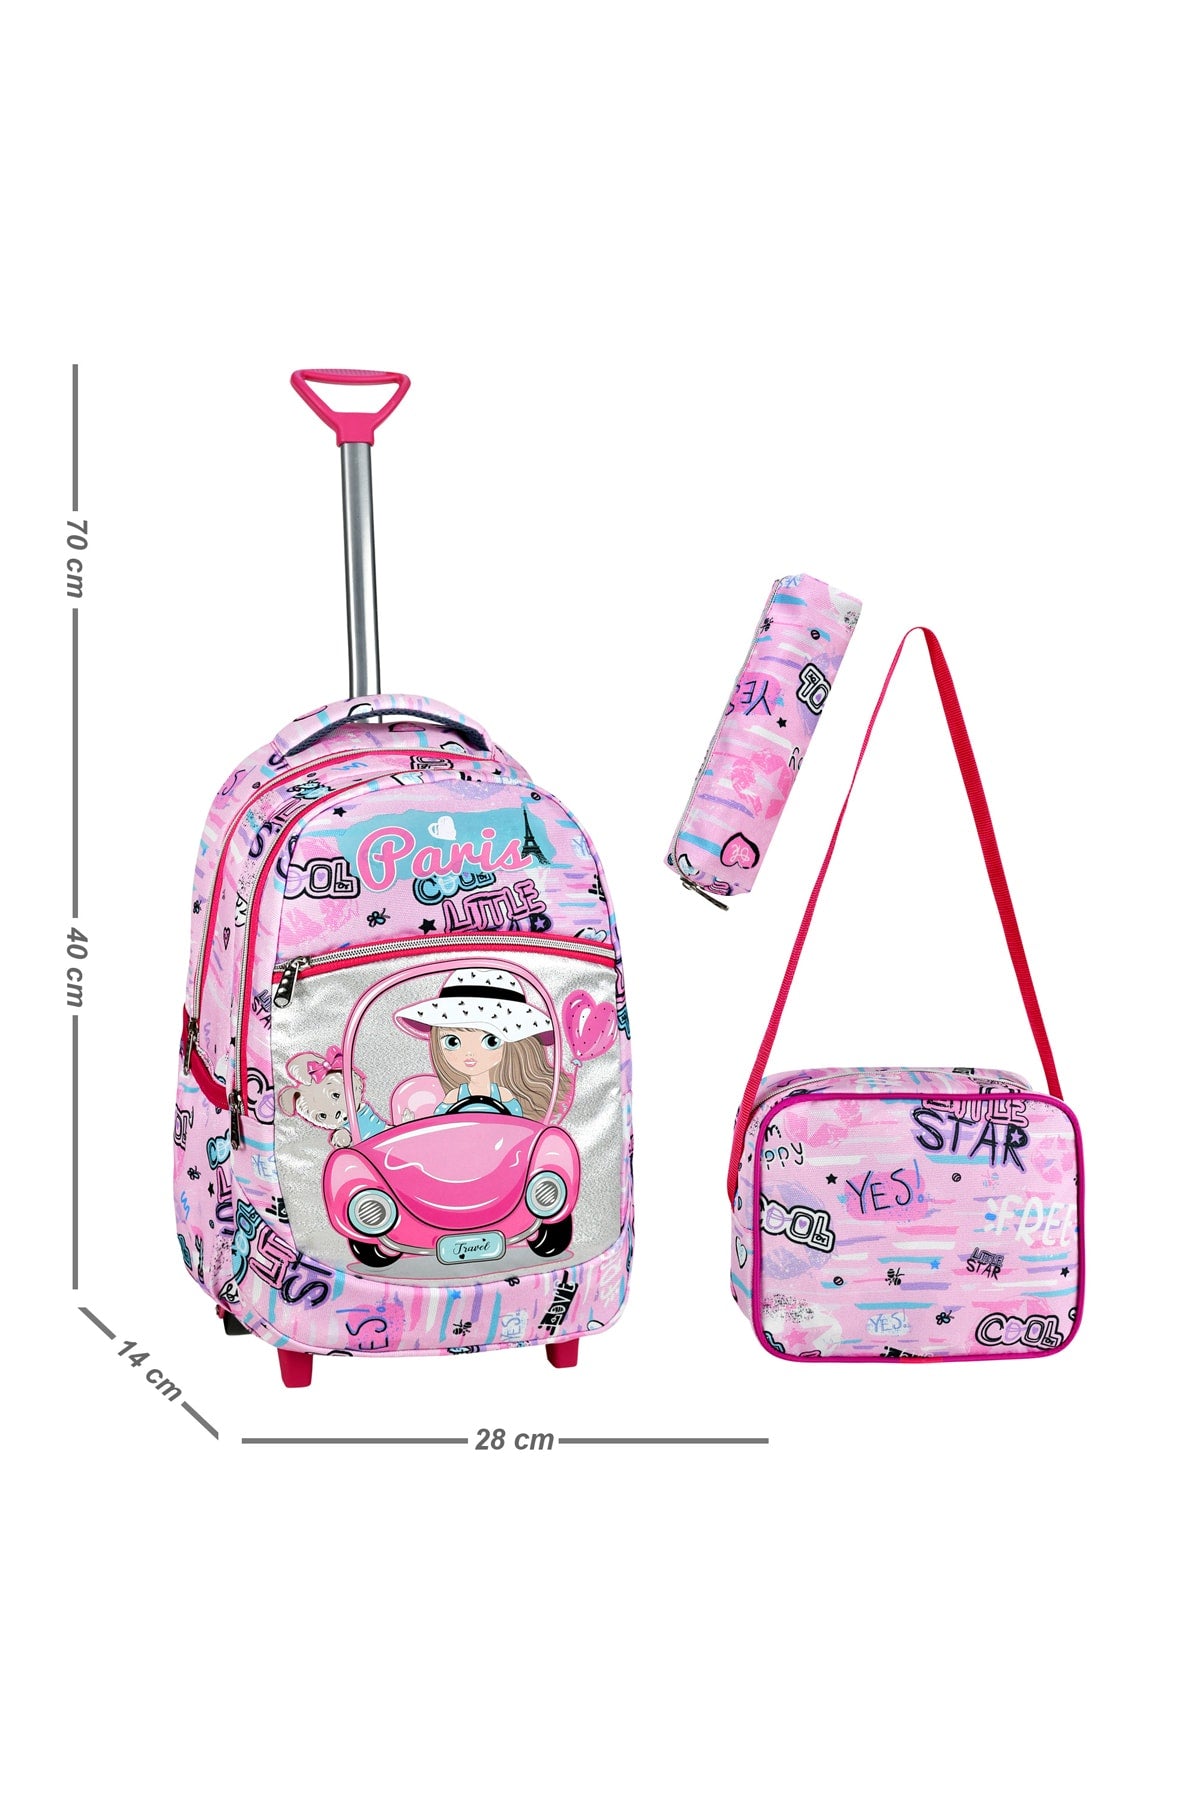 3 Pcs School Set with Squeegee, Pink Car Pattern Primary School Bag + Lunch Box + Pencil Holder